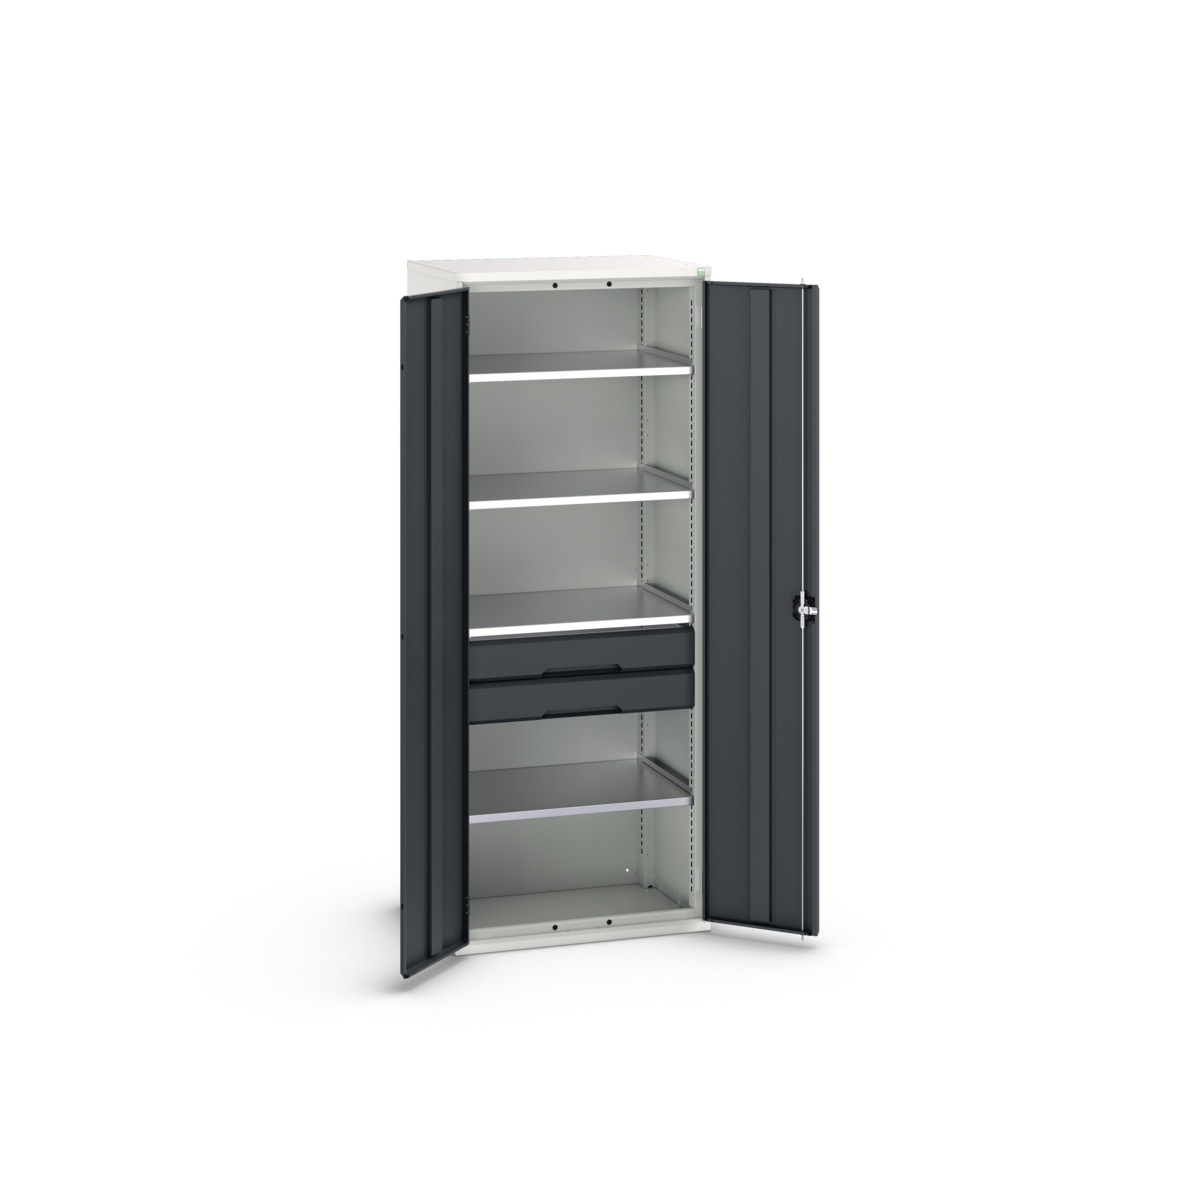 16926455. - verso kitted cupboard